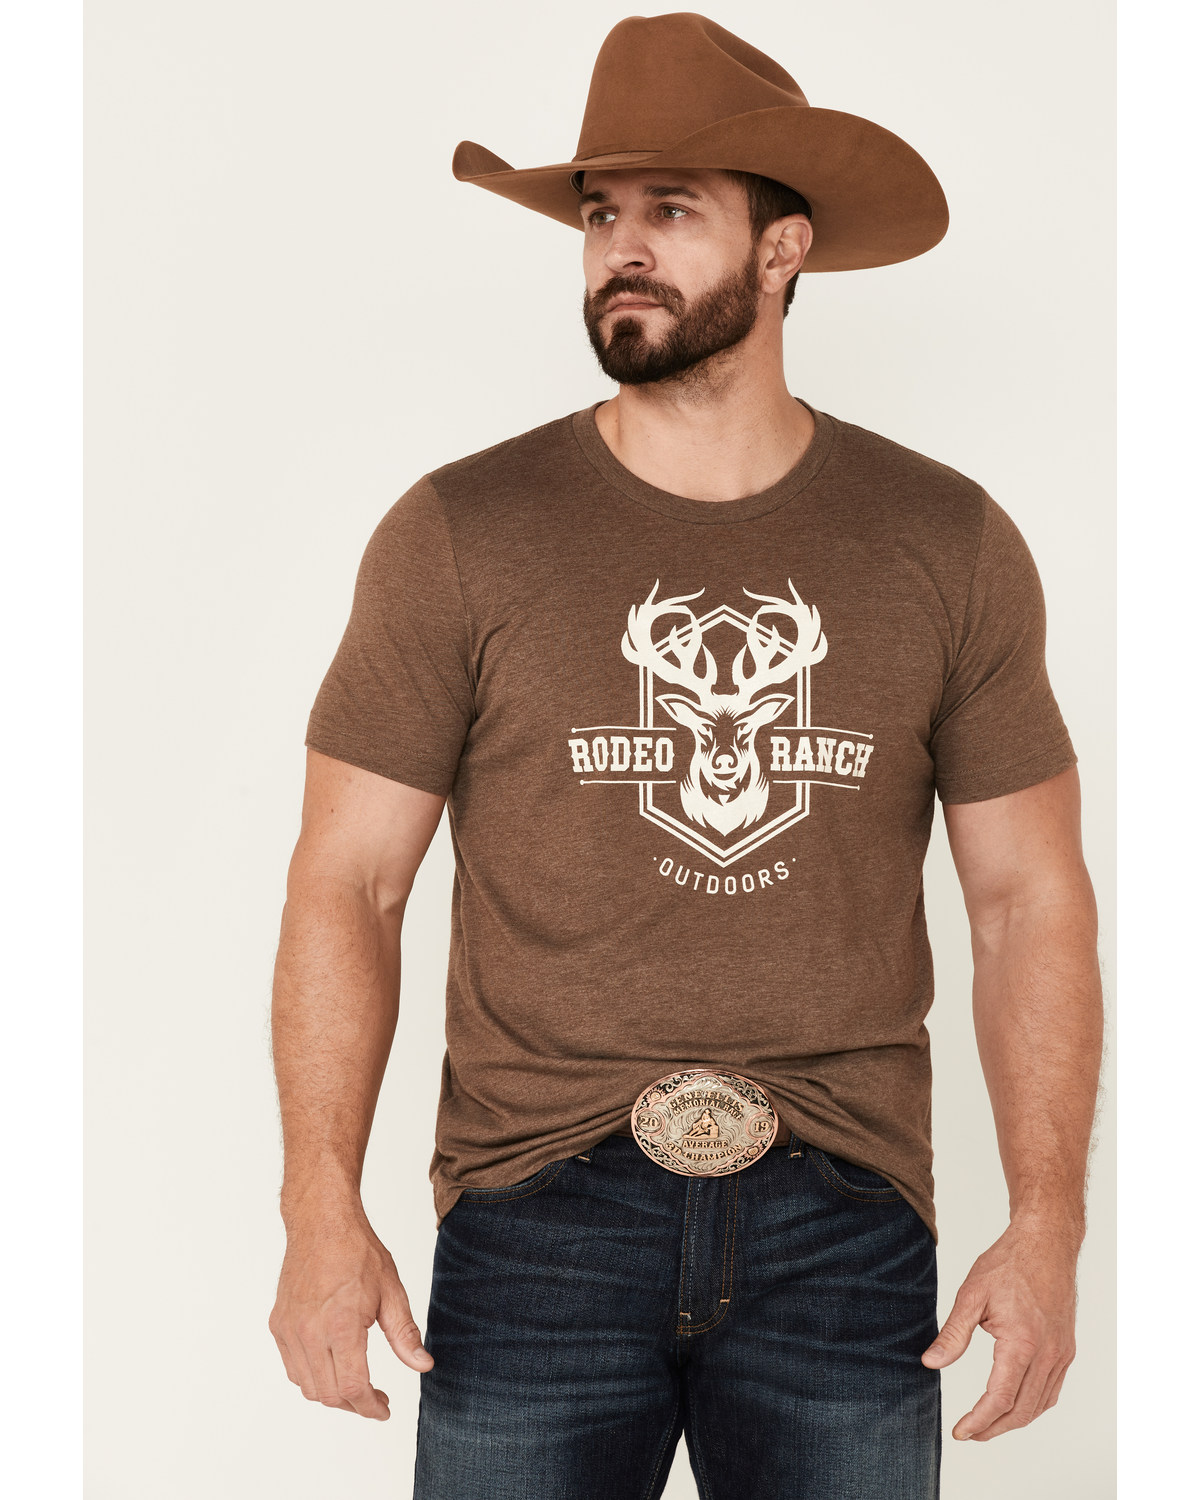 Rodeo Ranch Men's Heather Brown Outdoors Graphic Short Sleeve T-Shirt